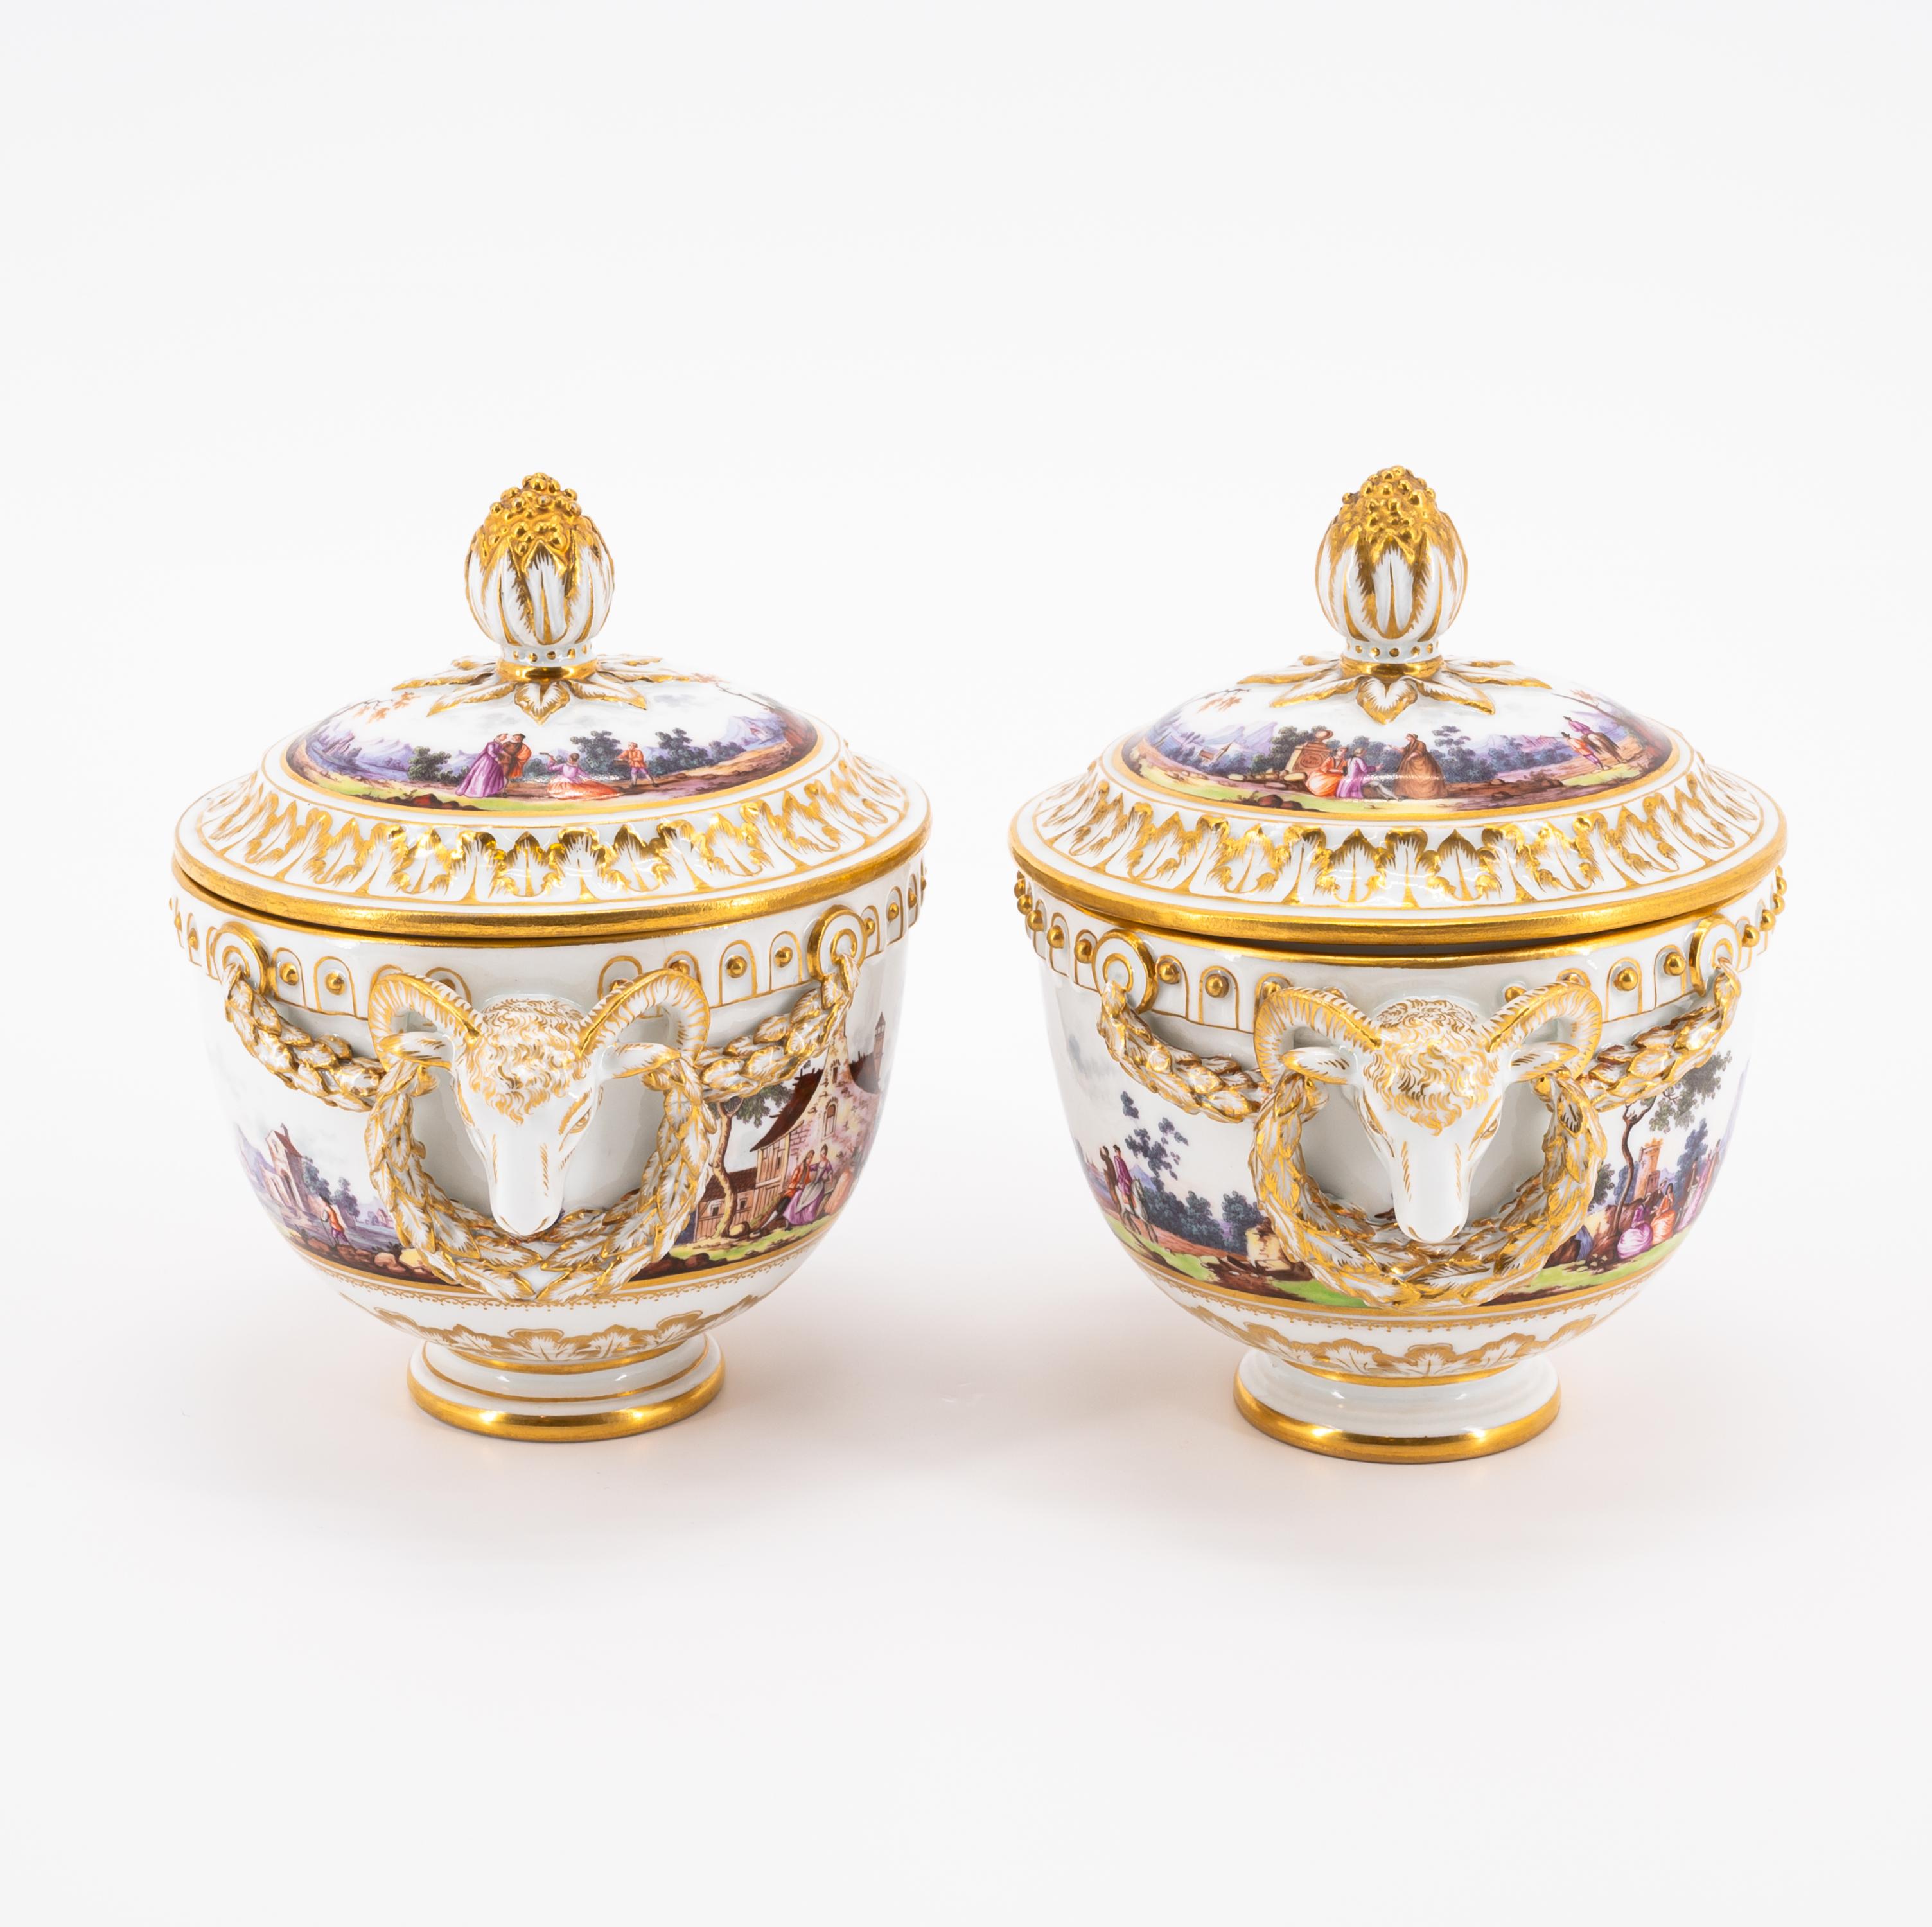 PAIR OF PORCELAIN LIDDED VESSELS WITH RAM DECORATION AND SURROUNDING LANDSCAPE PAINTINGS - Image 4 of 8